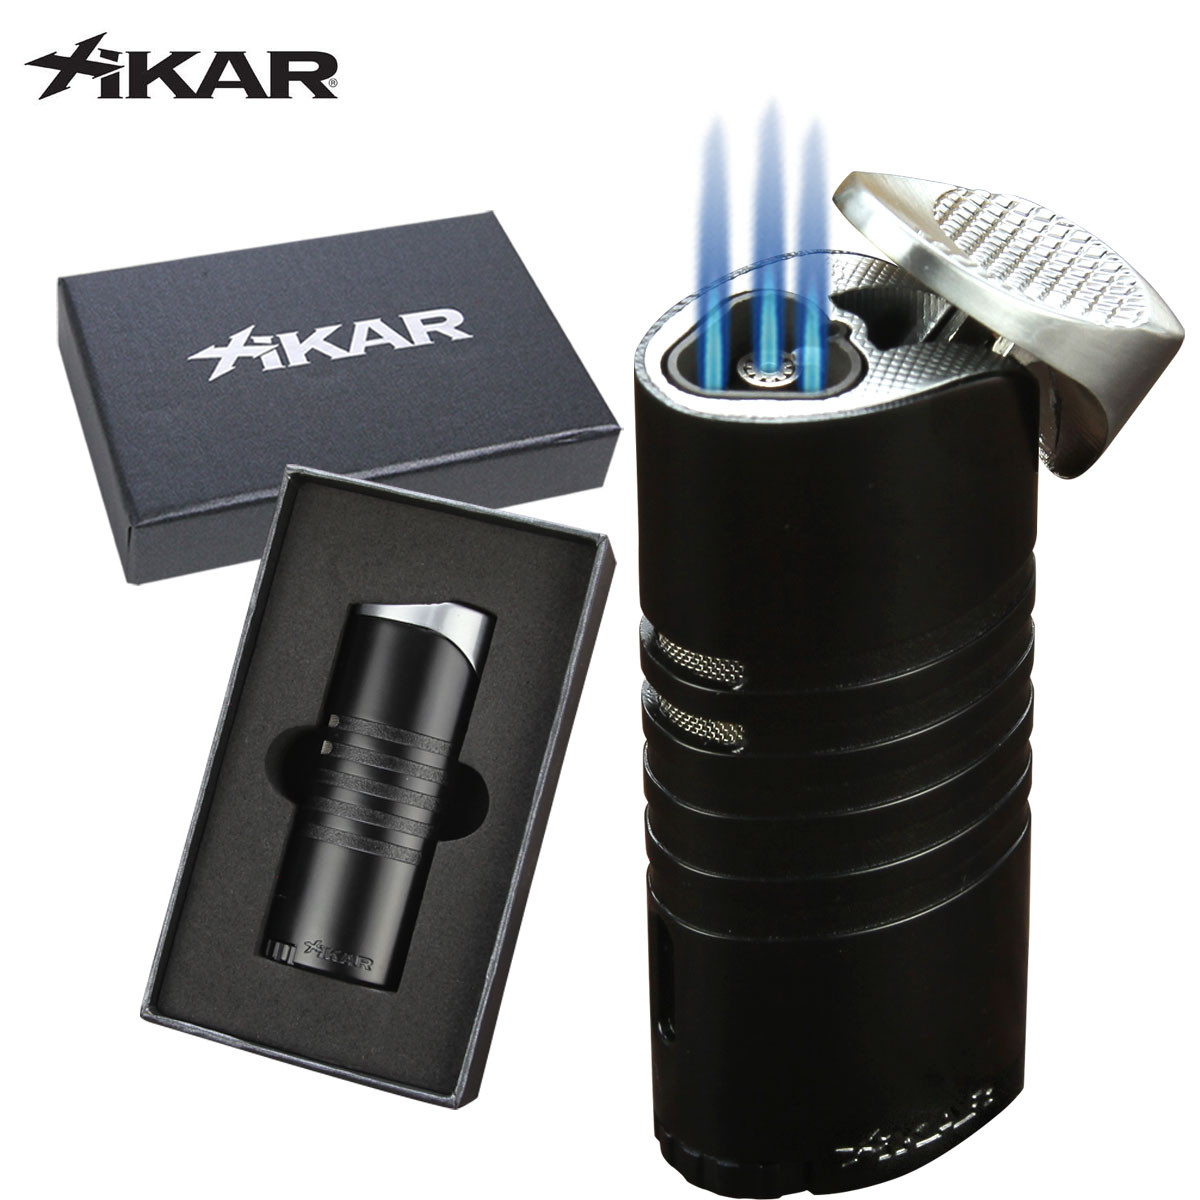 Xikar Ellipse III Triple Flame Lighter (black lacquer) $29 + Free Shipping